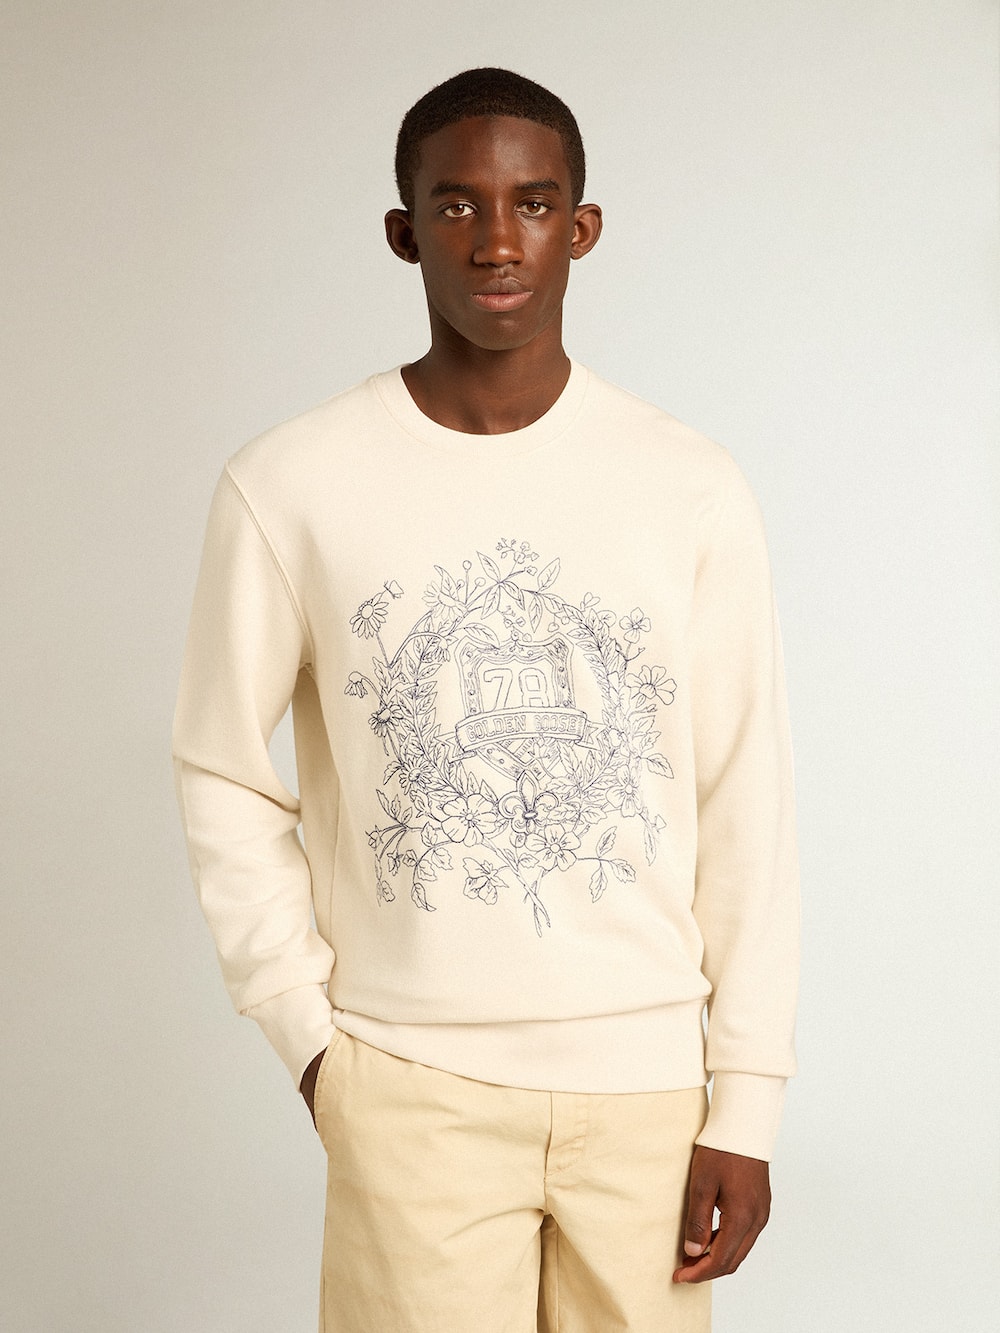 Golden Goose - Men's aged white cotton sweatshirt with embroidery on the front in 